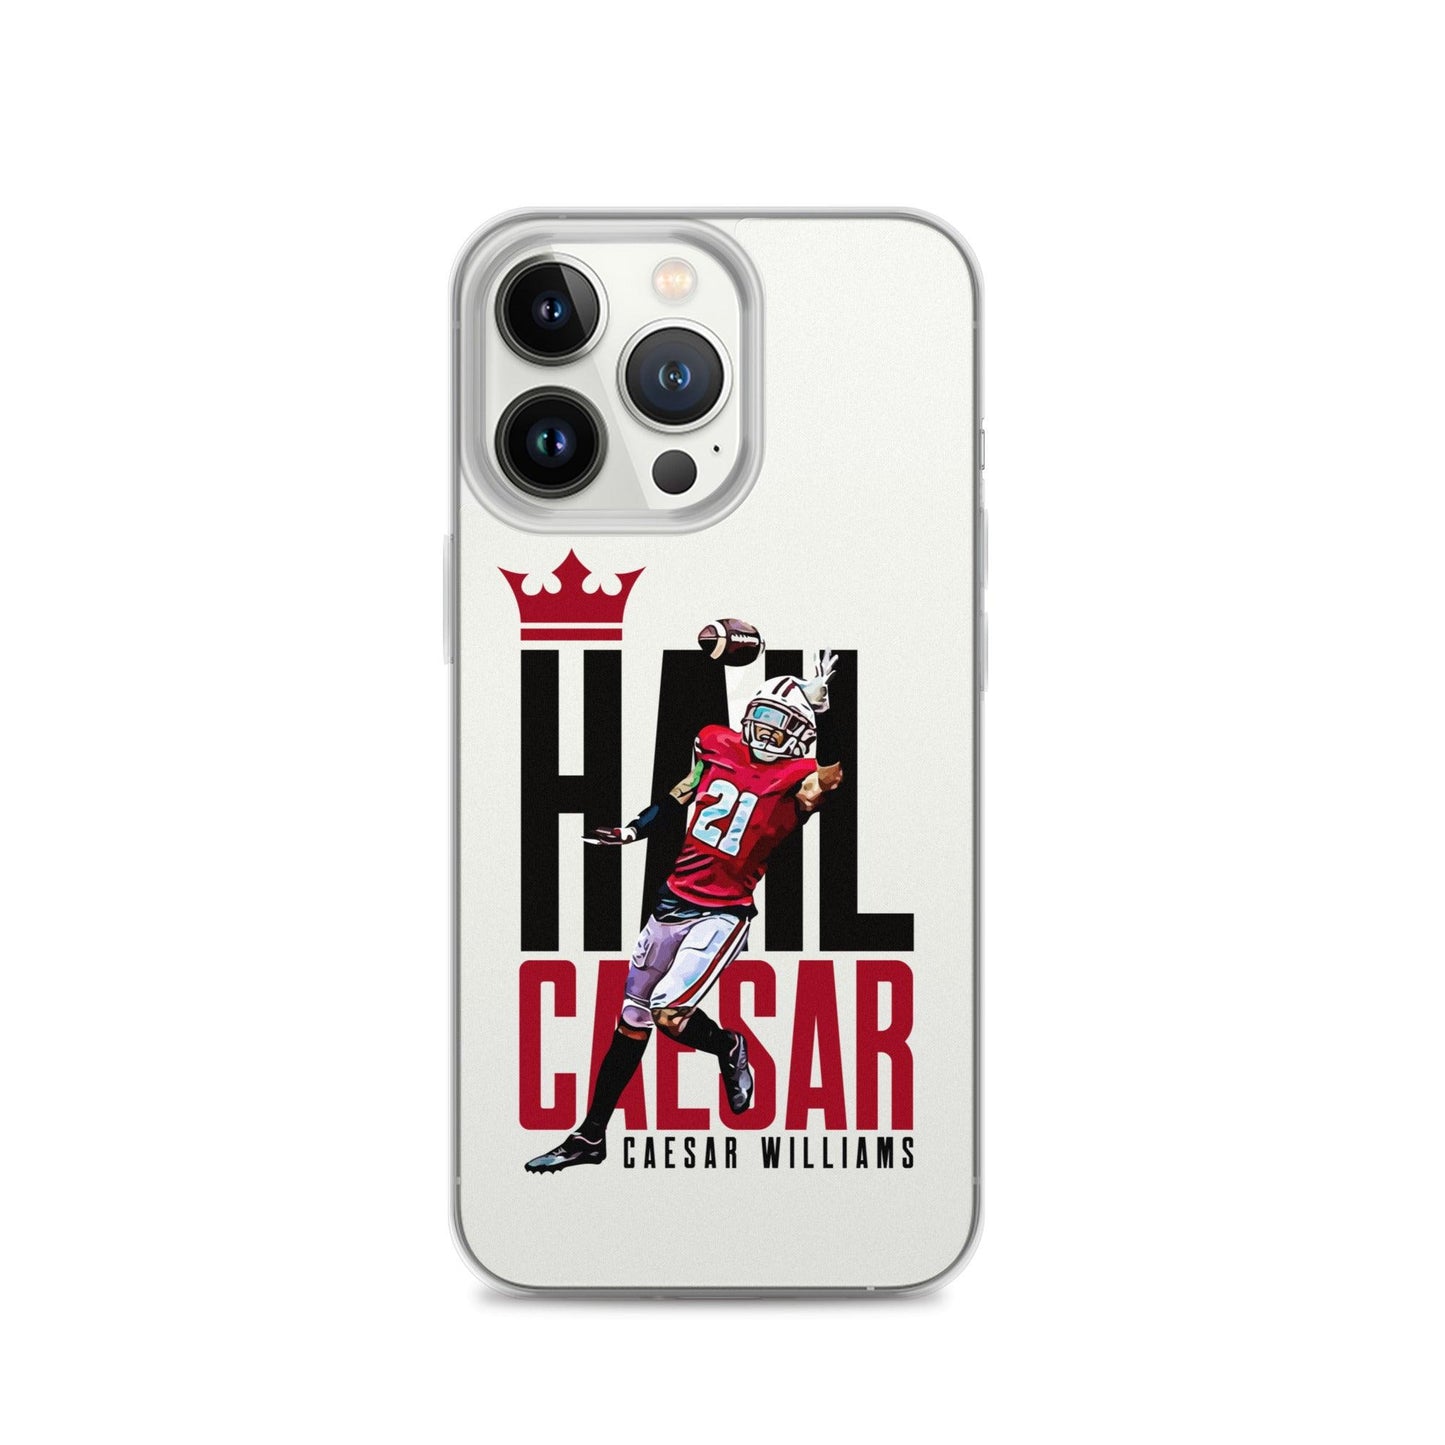 Caesar Williams "Crowned" iPhone Case - Fan Arch